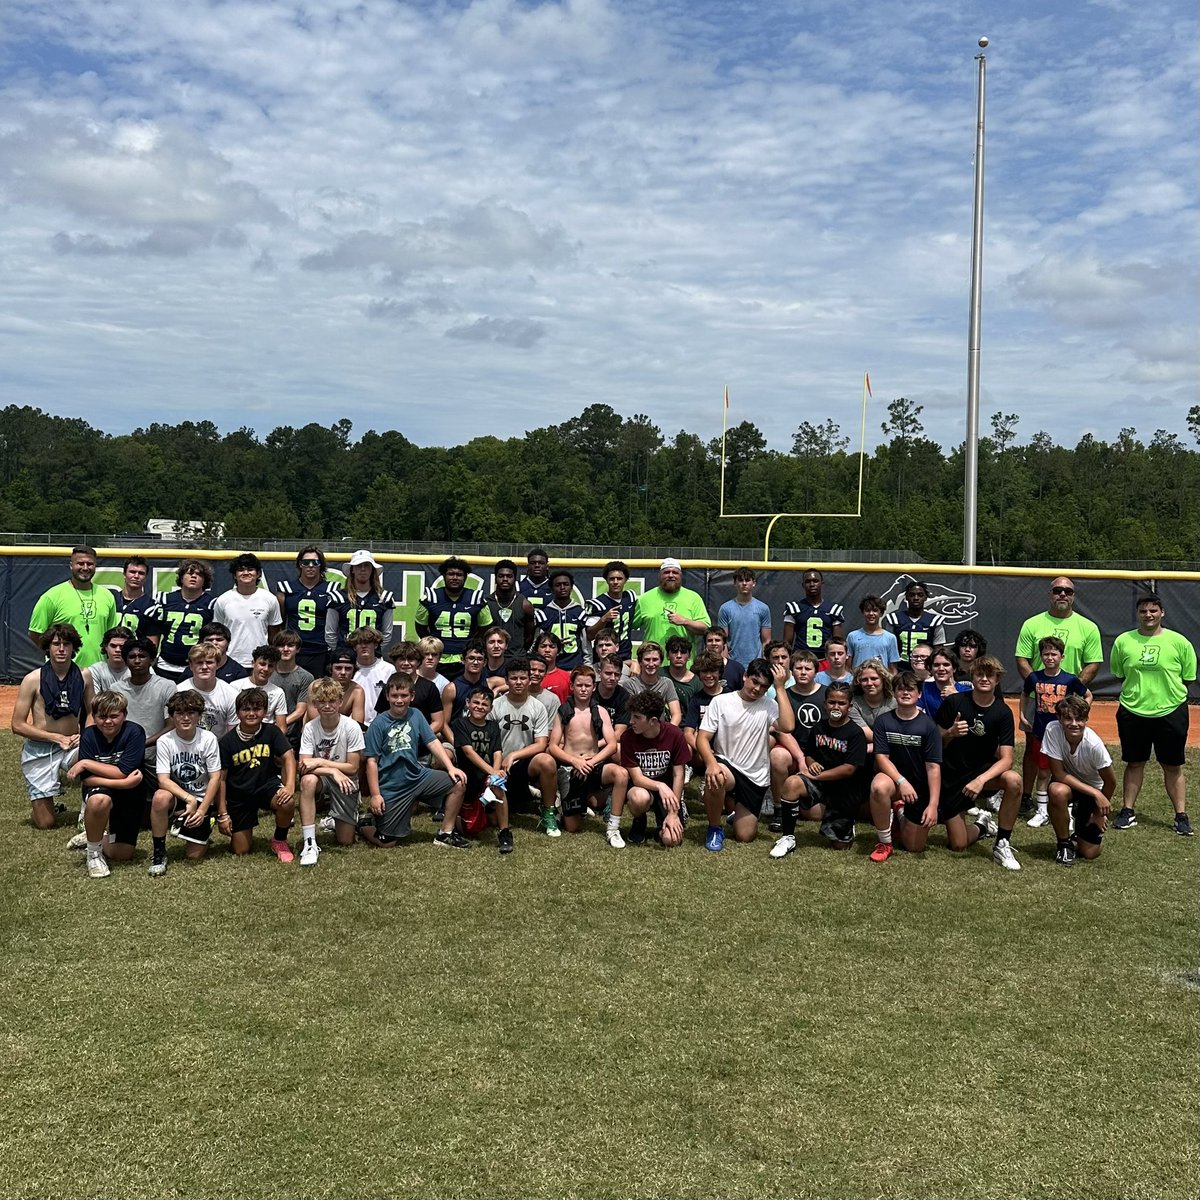 Today's youth football clinic was a huge success! The kids brought so much energy and enthusiasm to the field! We can't wait to keep the momentum going at our upcoming summer camp June 24-27th! Don’t forget to register via the link in bio! #BeachsideMade #BarracudaNation